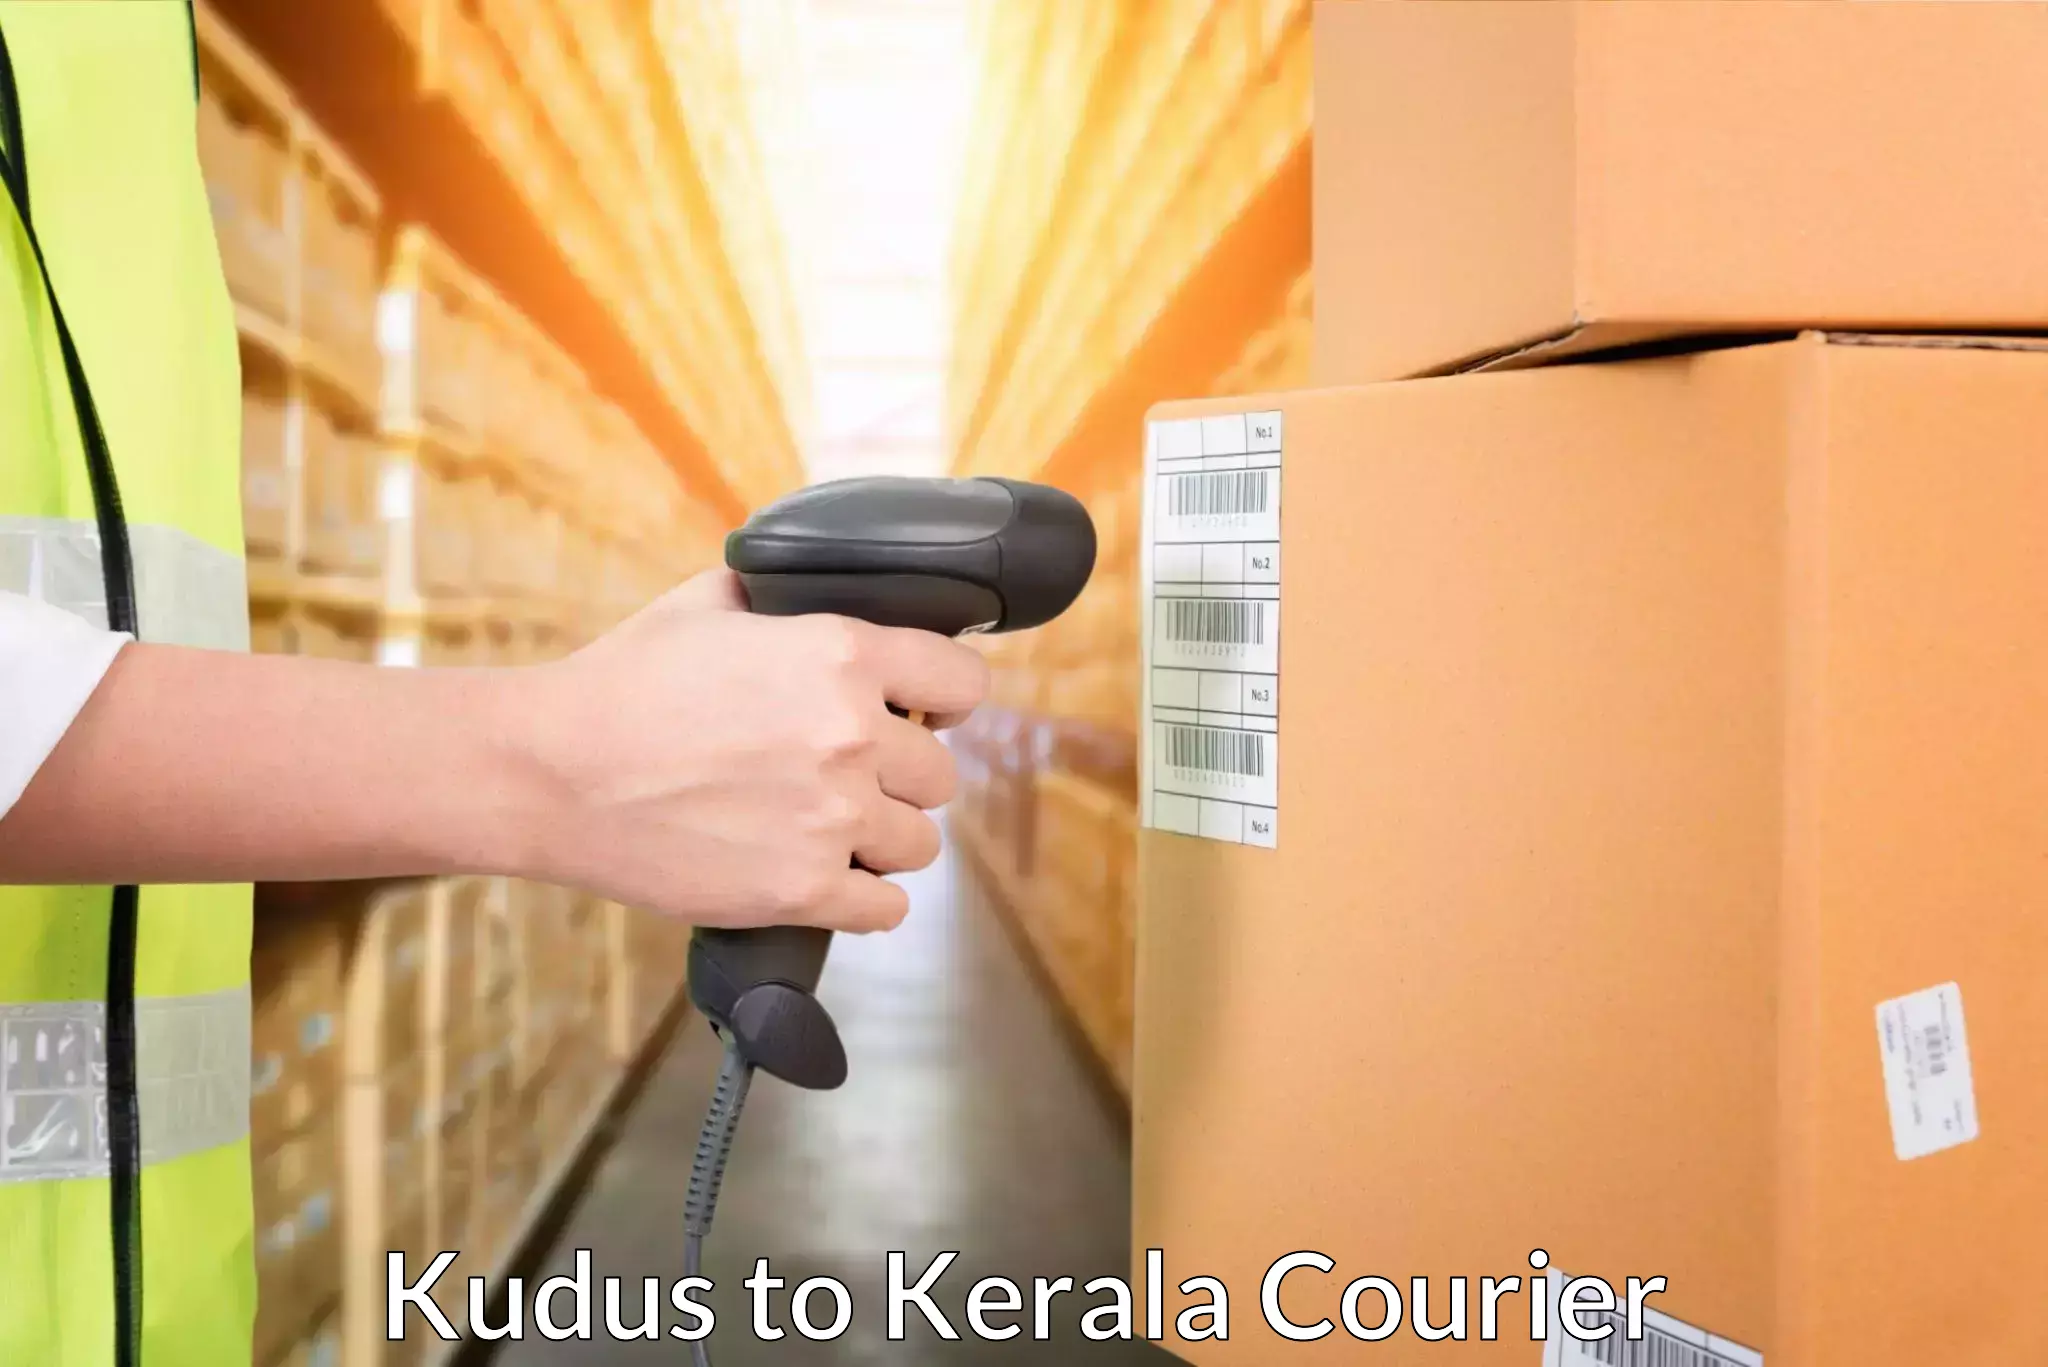 Online shipping calculator Kudus to Cochin University of Science and Technology